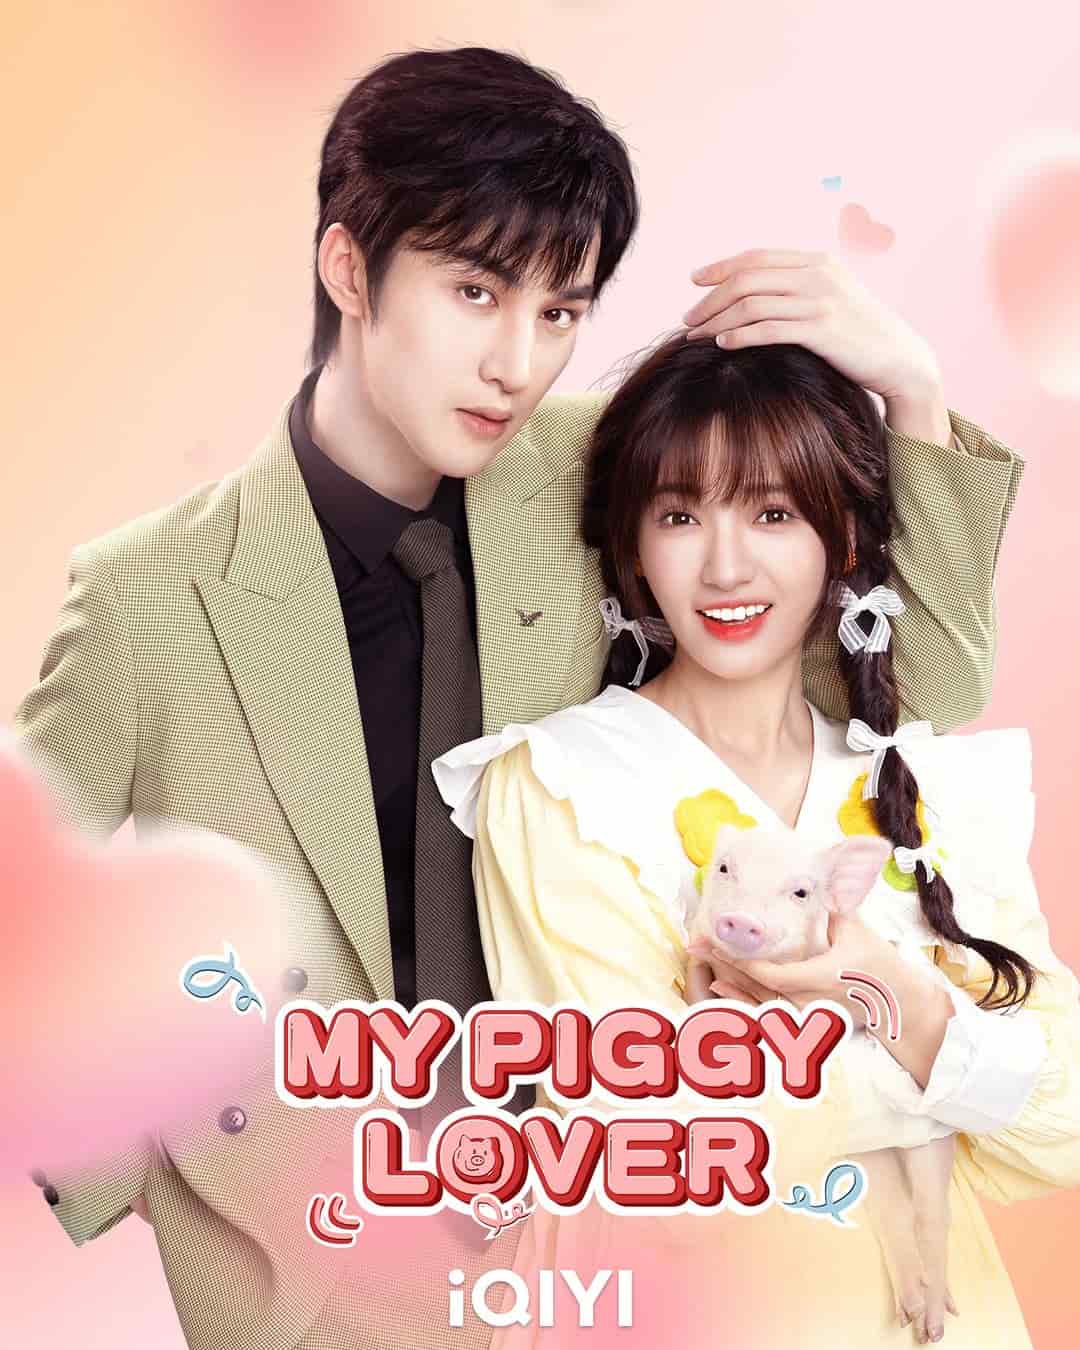 My Piggy Lover - Sinopsis, Pemain, OST, Episode, Review